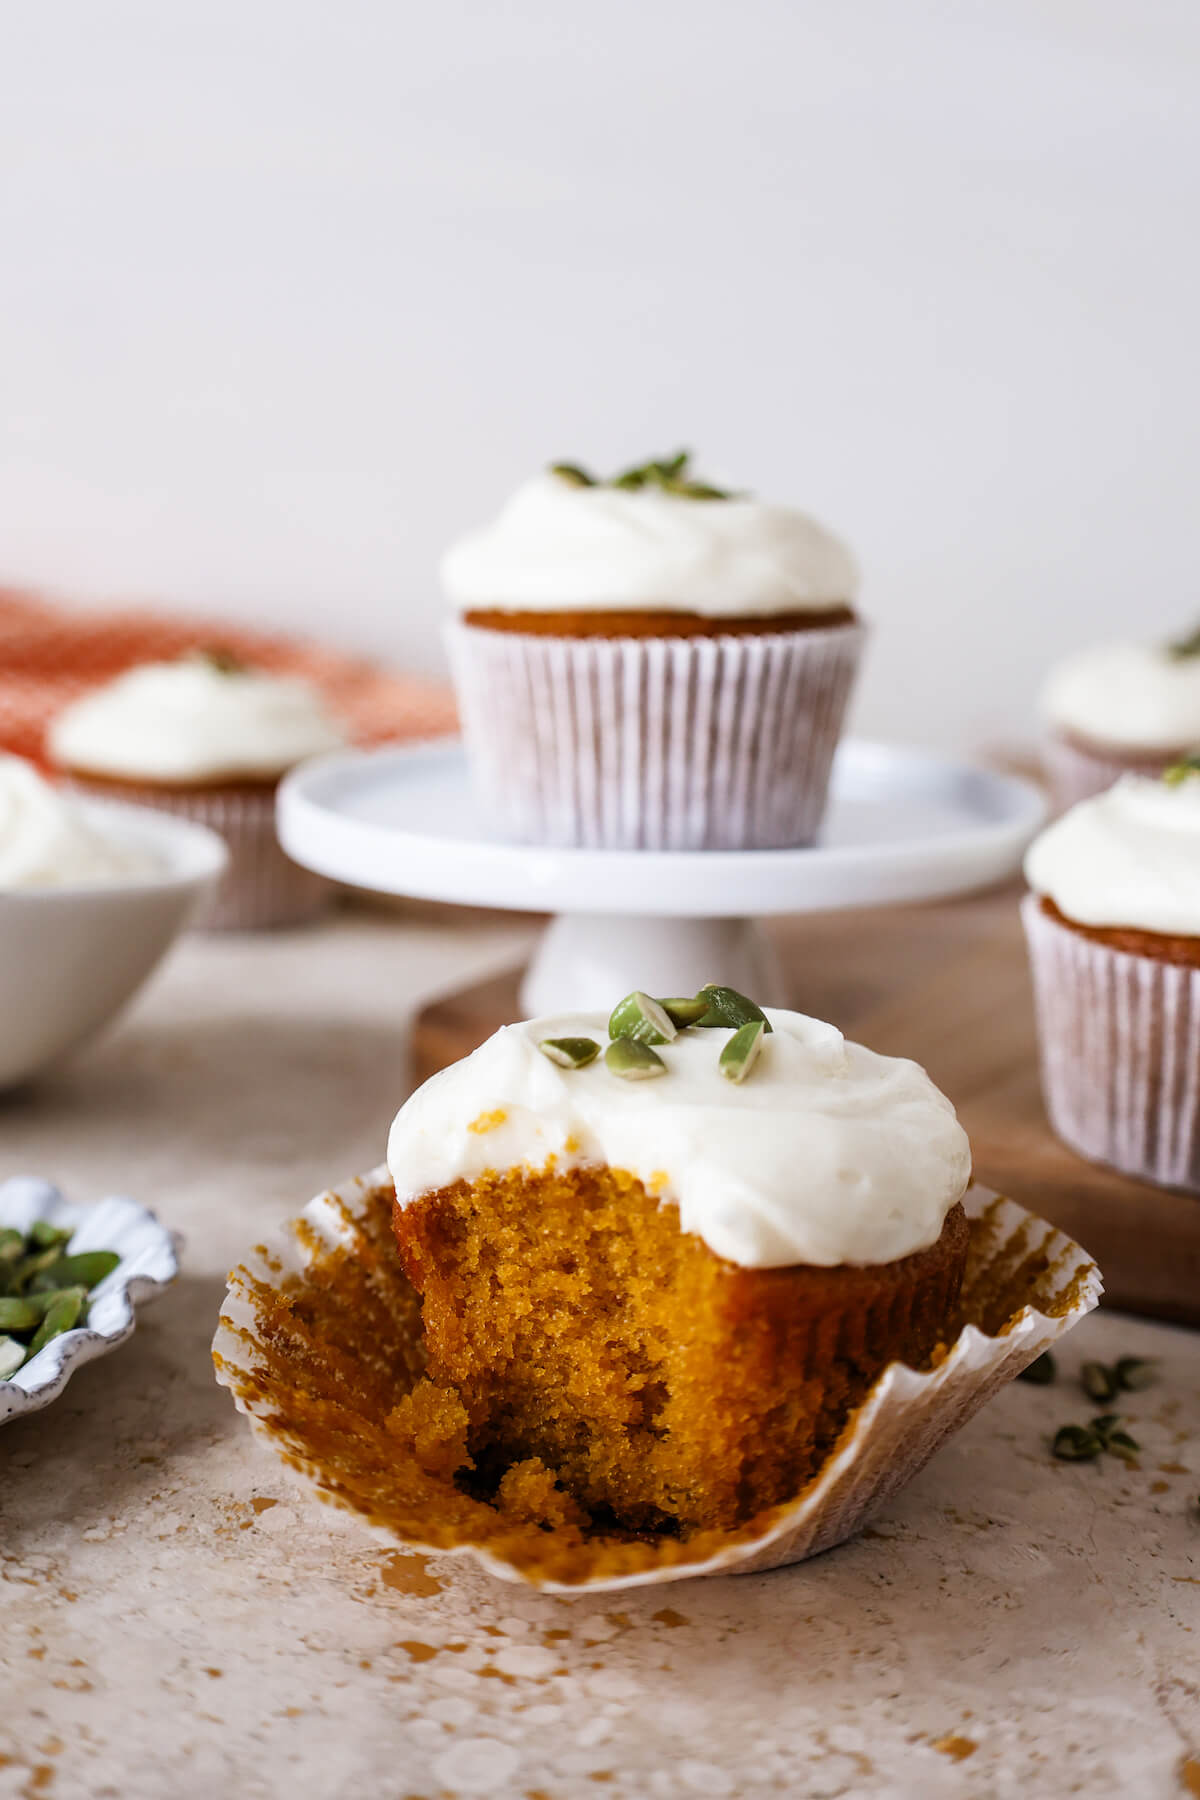 Pumpkin cupcake surrounded by other cupcakes on a stone table, with one bite taken out.